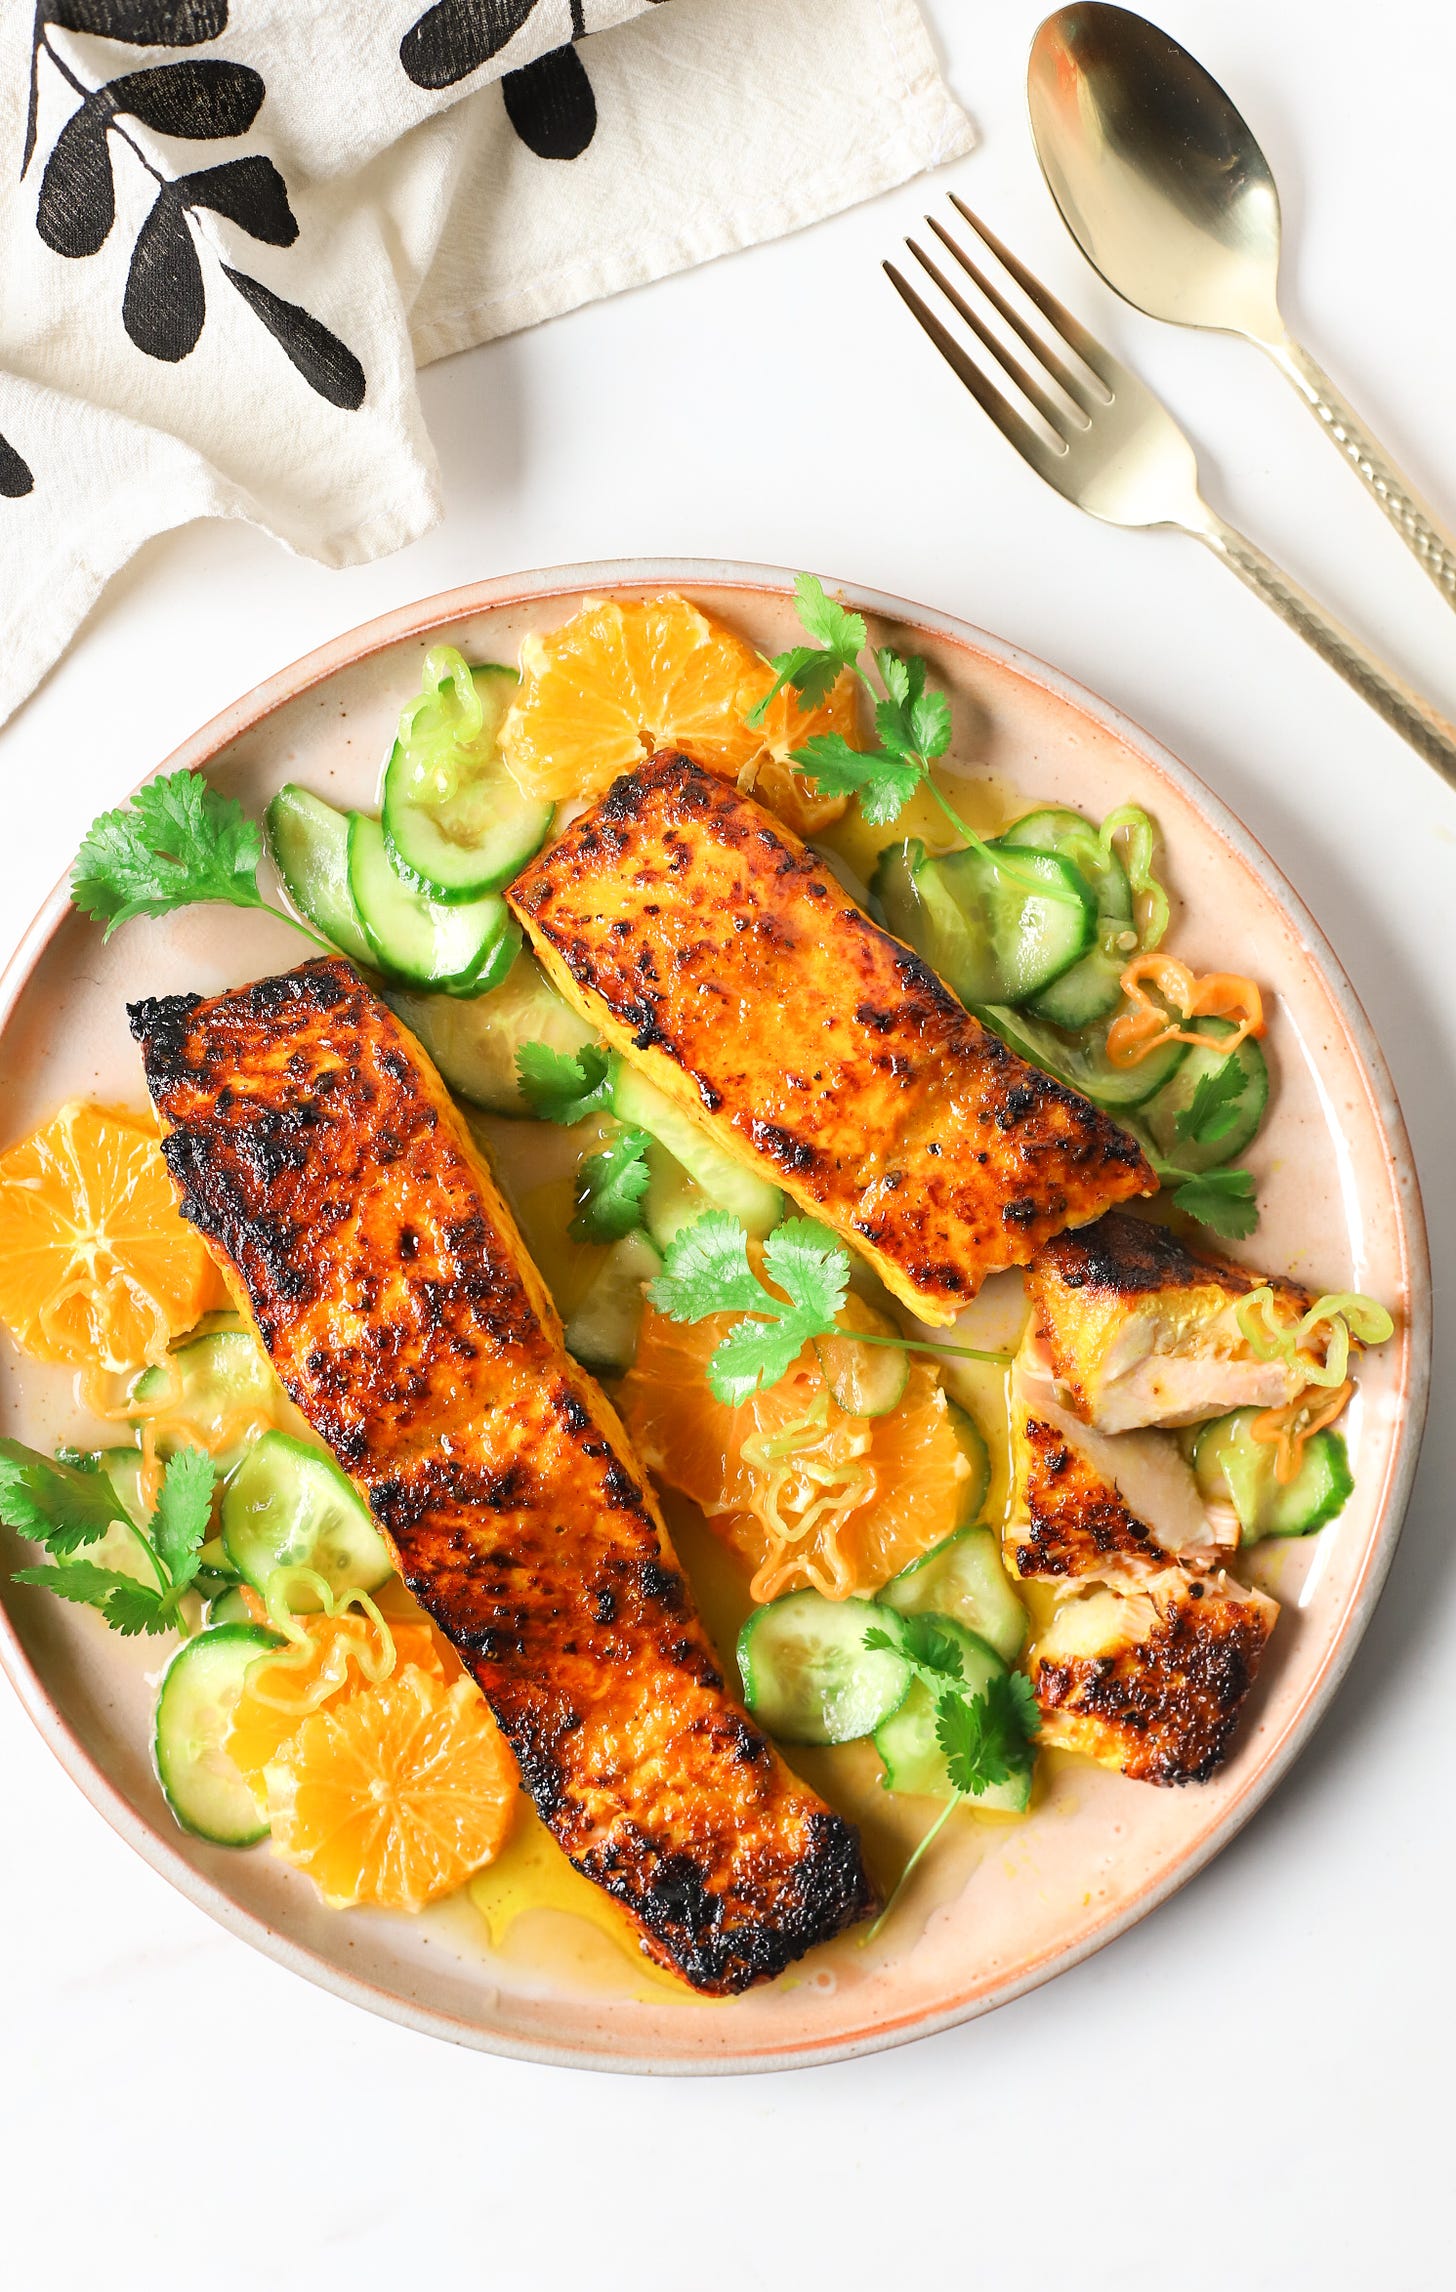 Plate of broiled turmeric-honey salmon with oranges, cucumbers, and habanero peppers